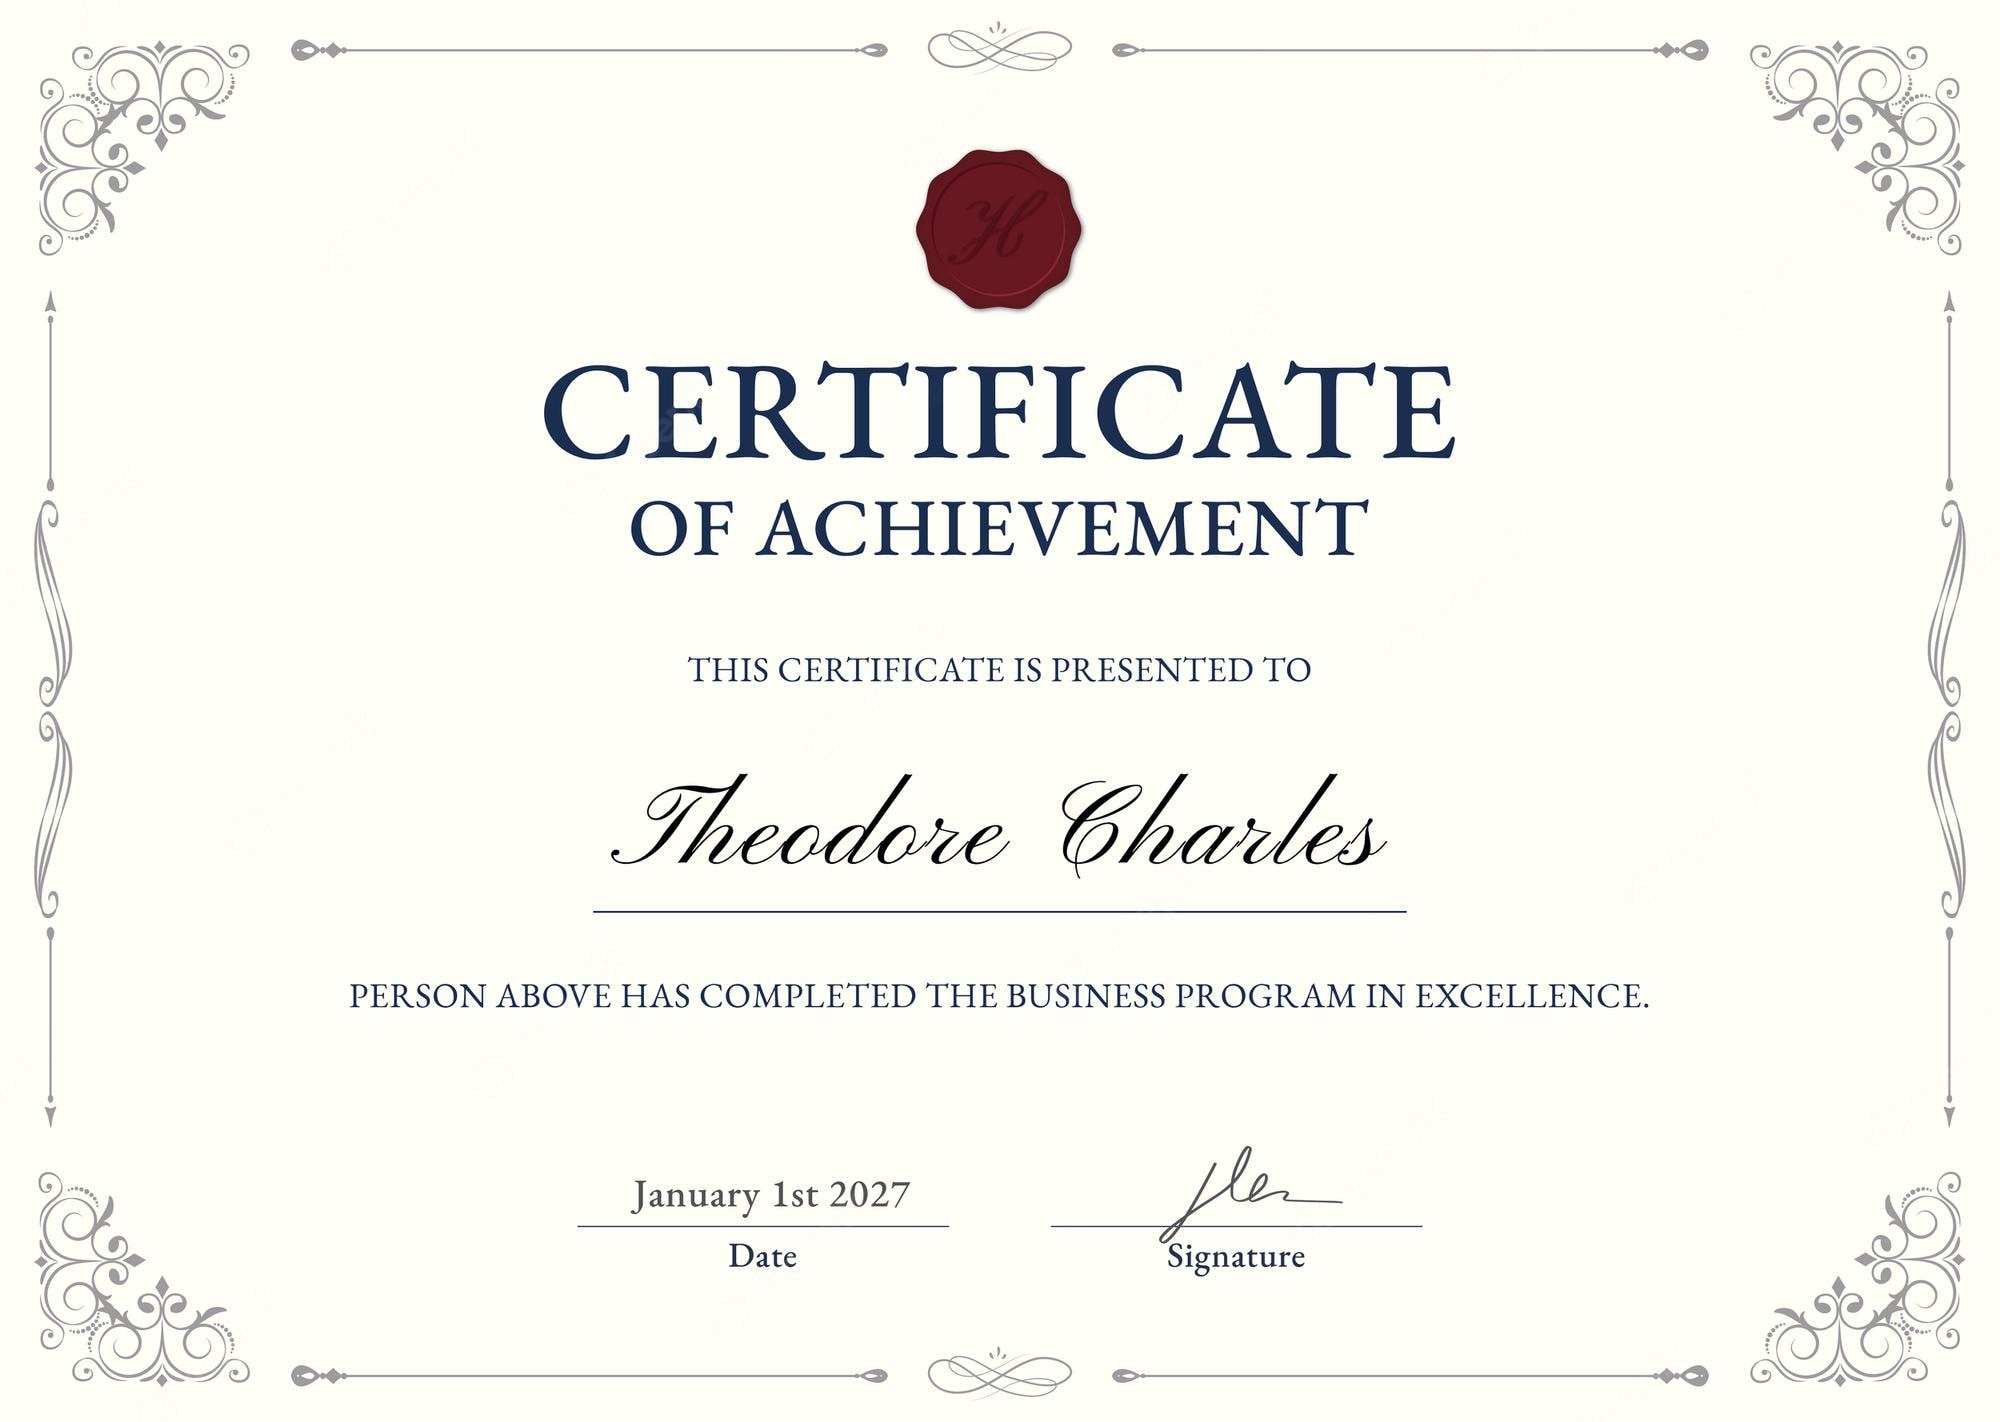 Education certificate Images  Free Vectors, Stock Photos & PSD Throughout Masters Degree Certificate Template